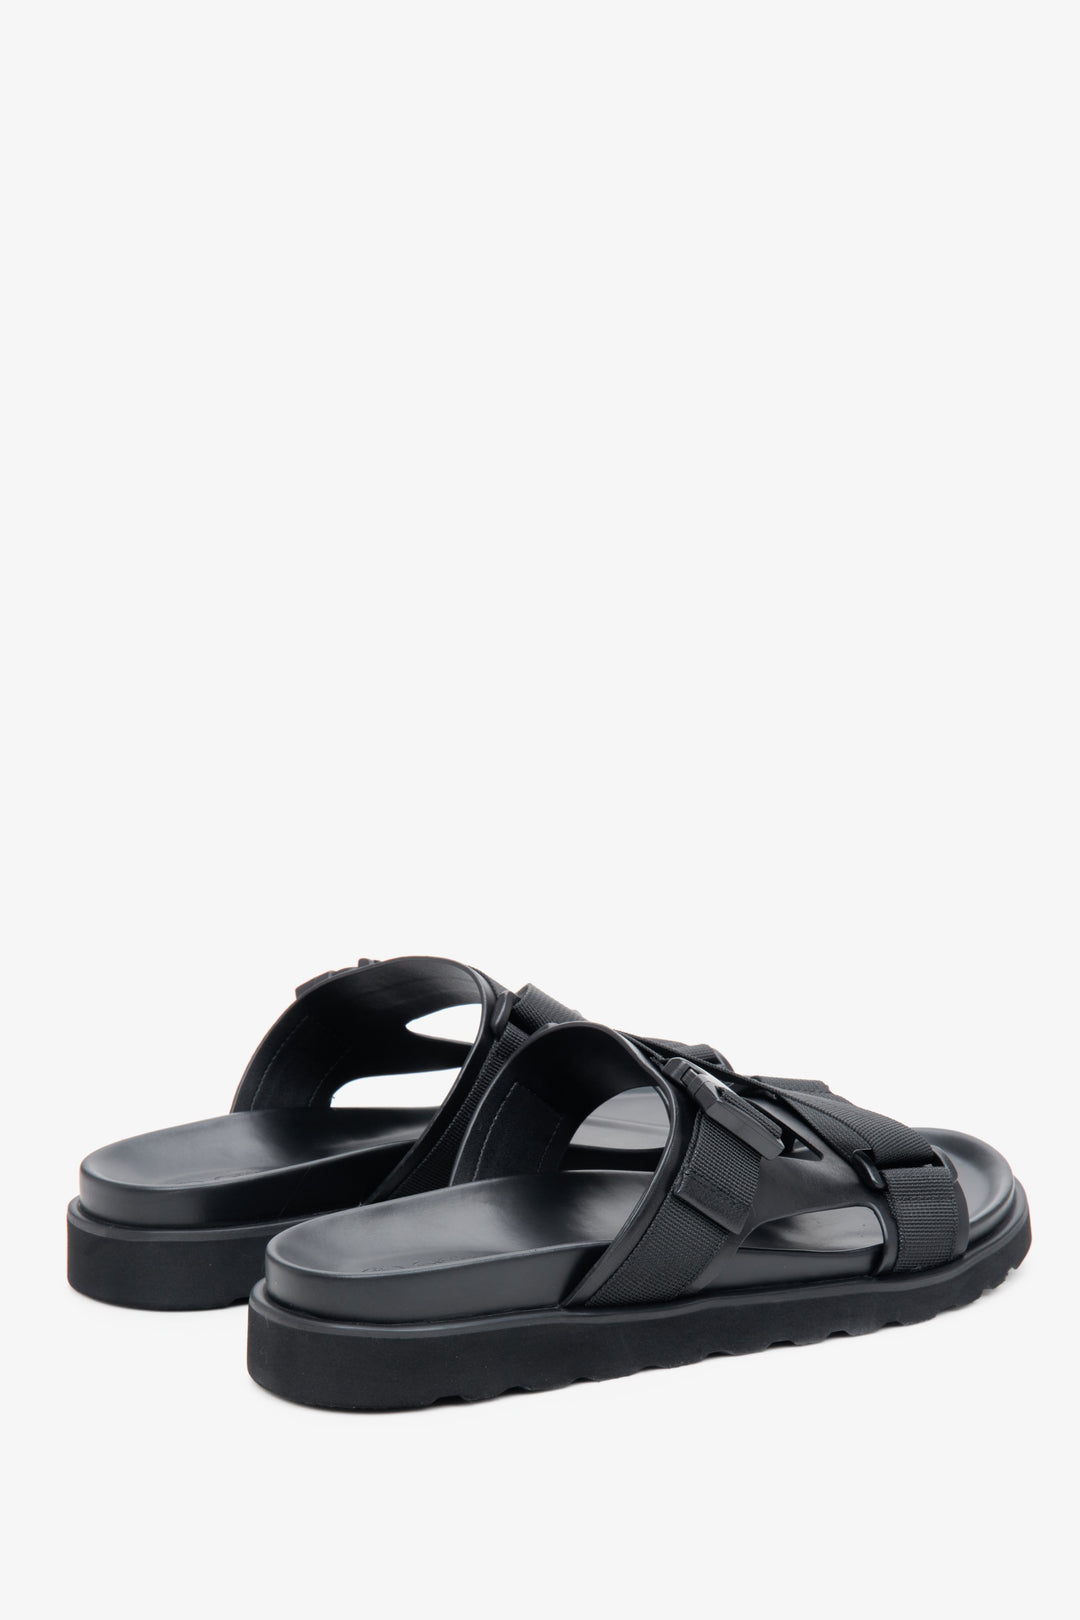 Men's comfortable black slides in genuine leather and textiles - close-up of the side profile and heel.